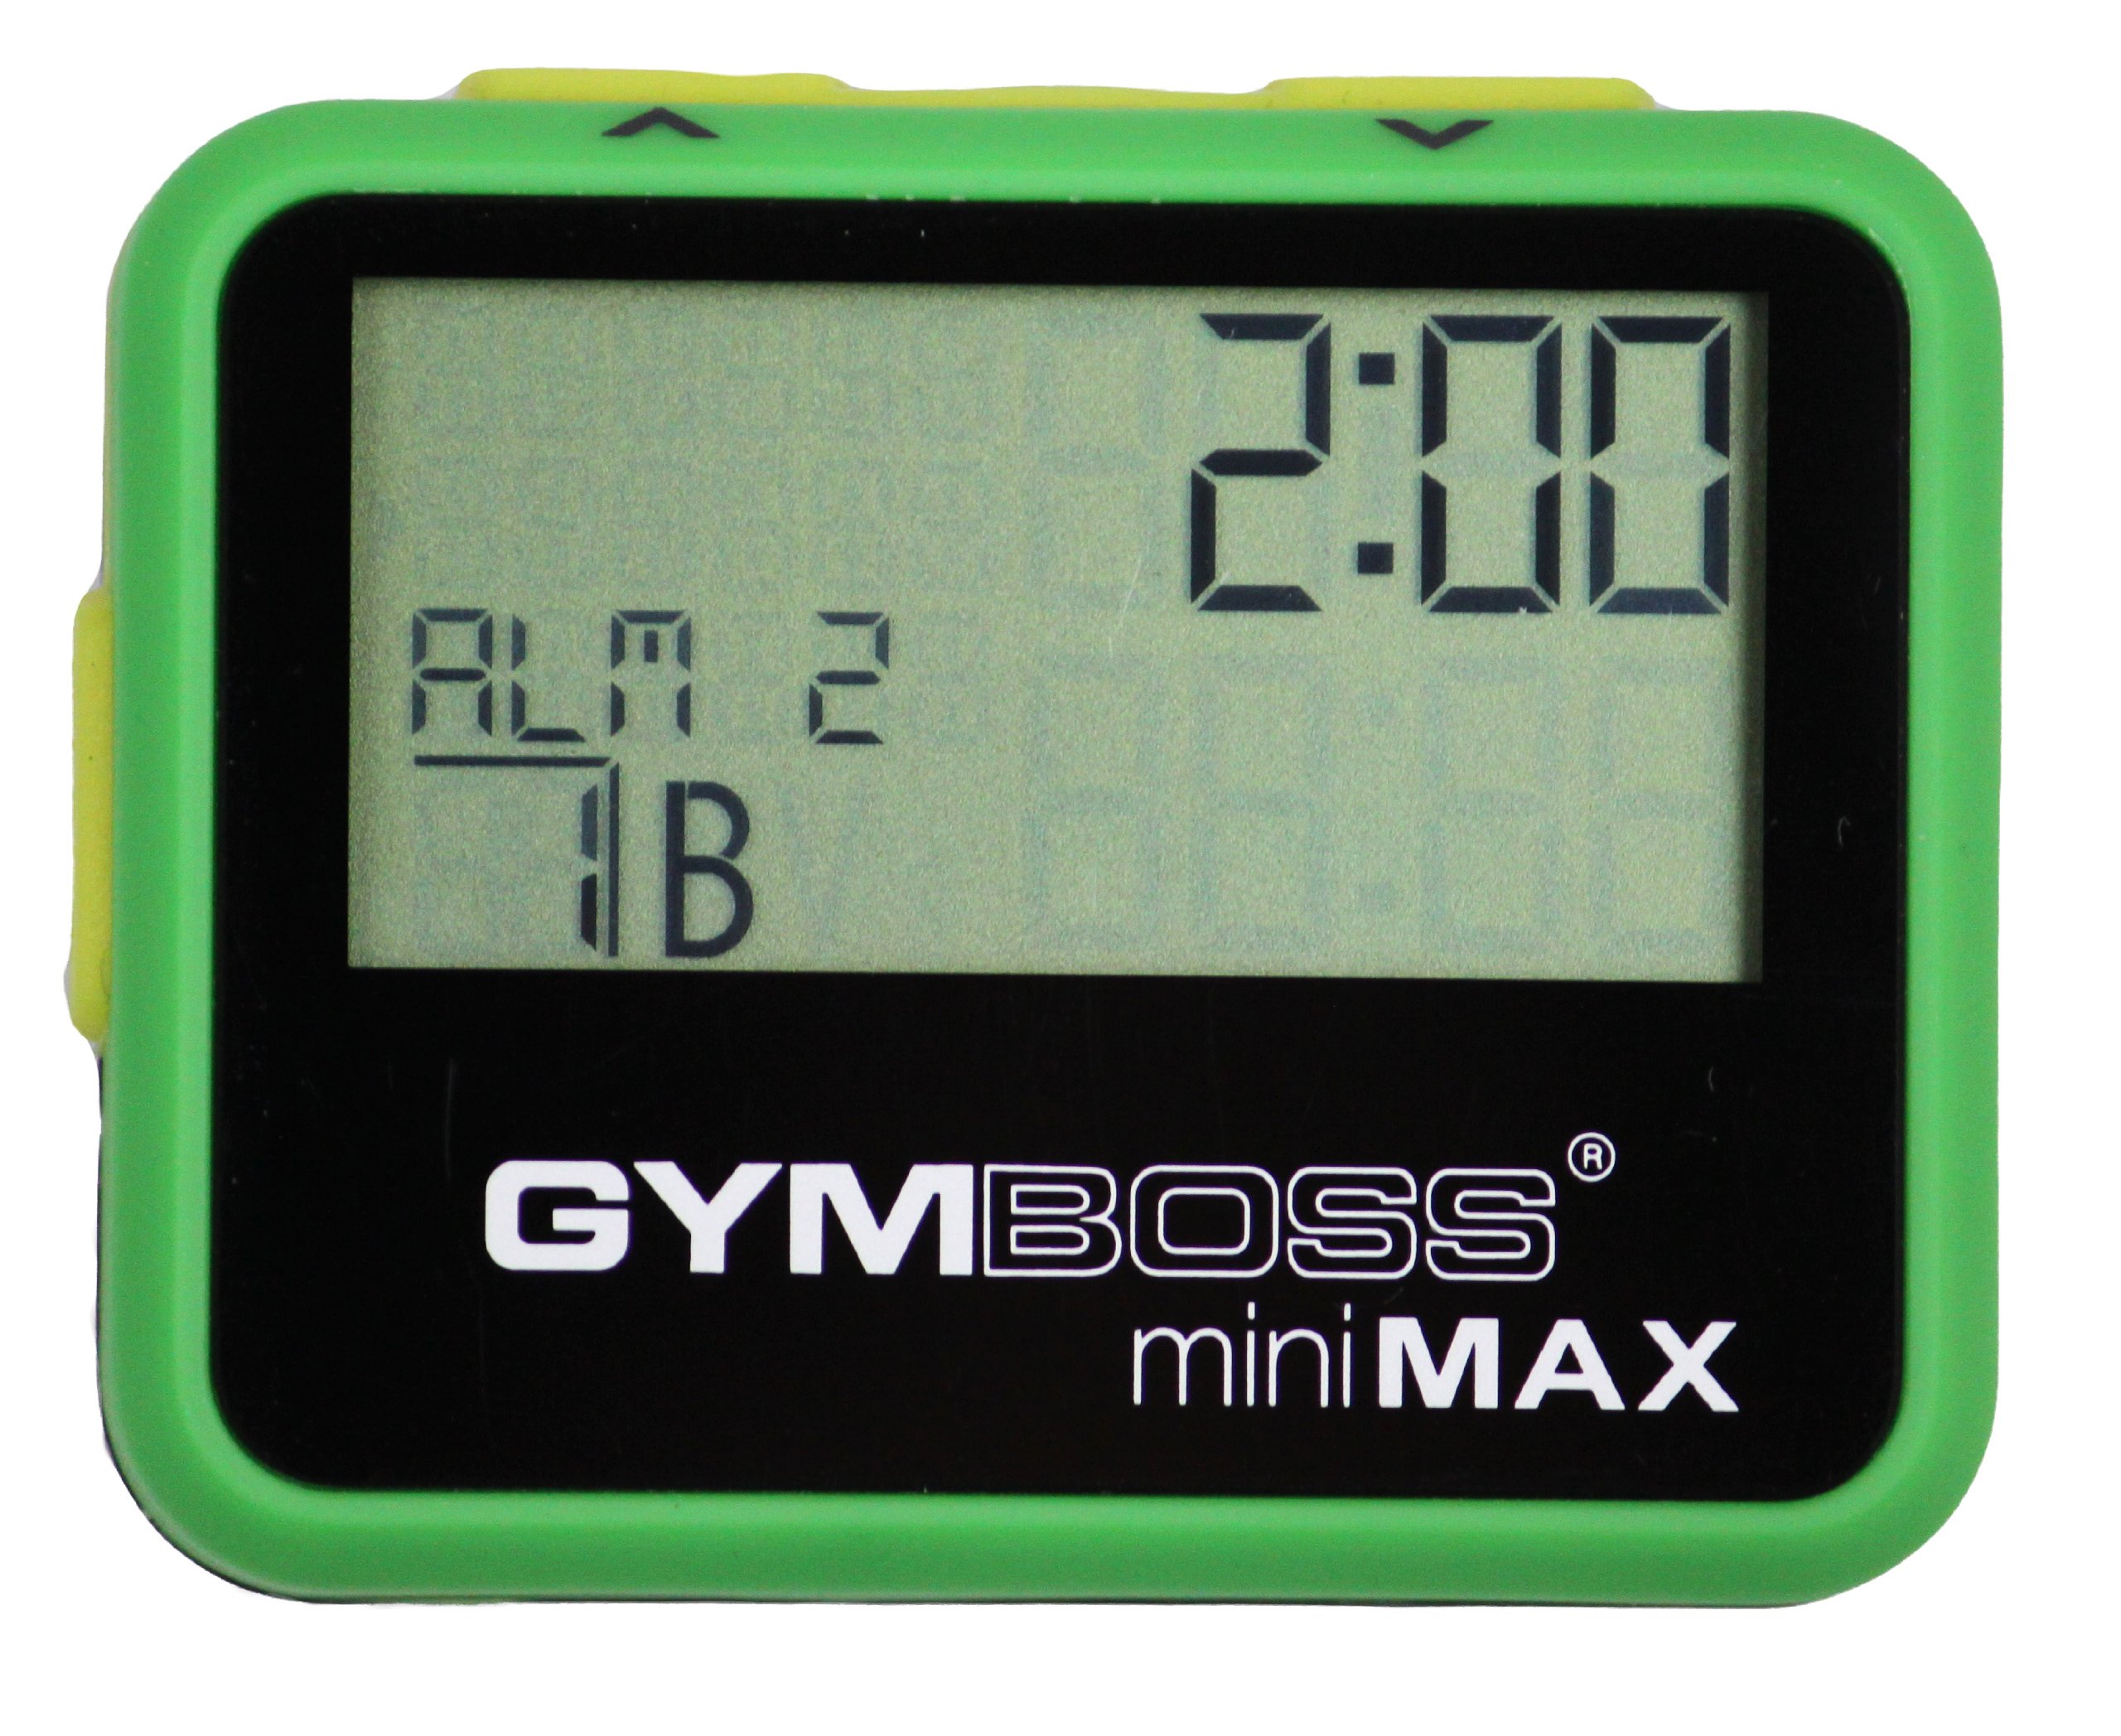 Gymboss miniMAX Interval Timer and Stopwatch - Green/Yellow SOFTCOAT